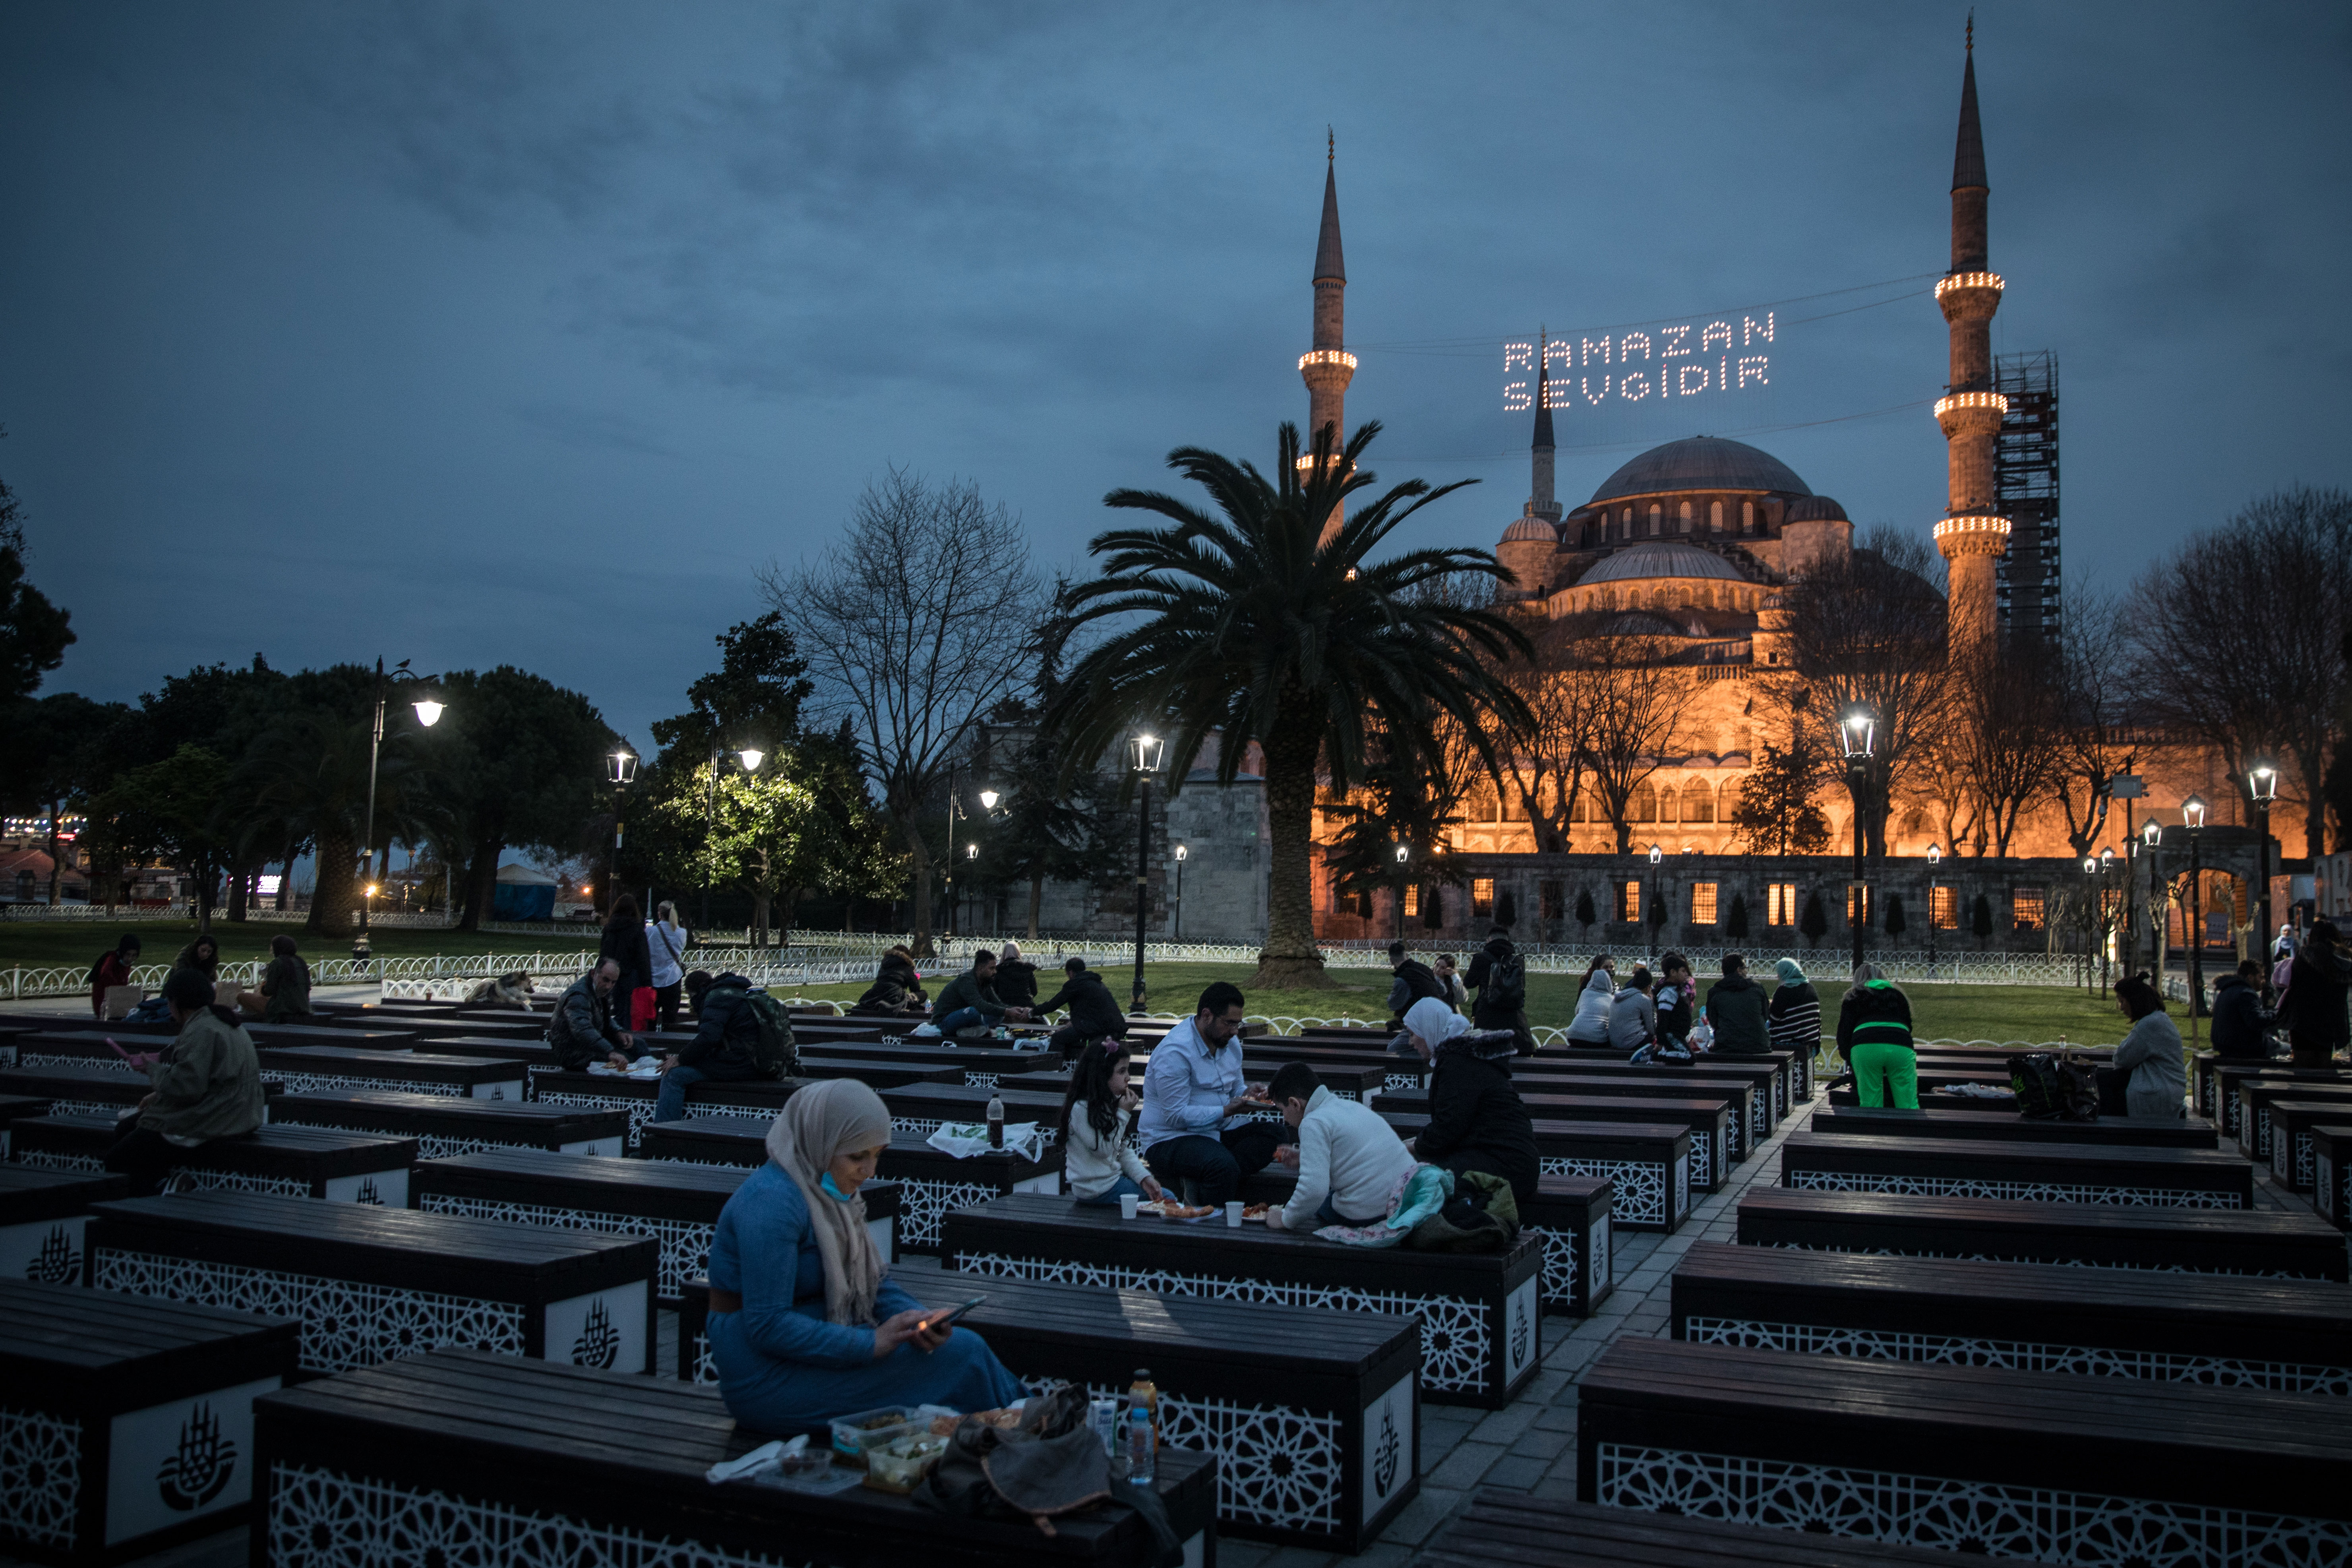 People break their fast during Ramadan in front of the Blue Mosque in Istanbul on April 13.